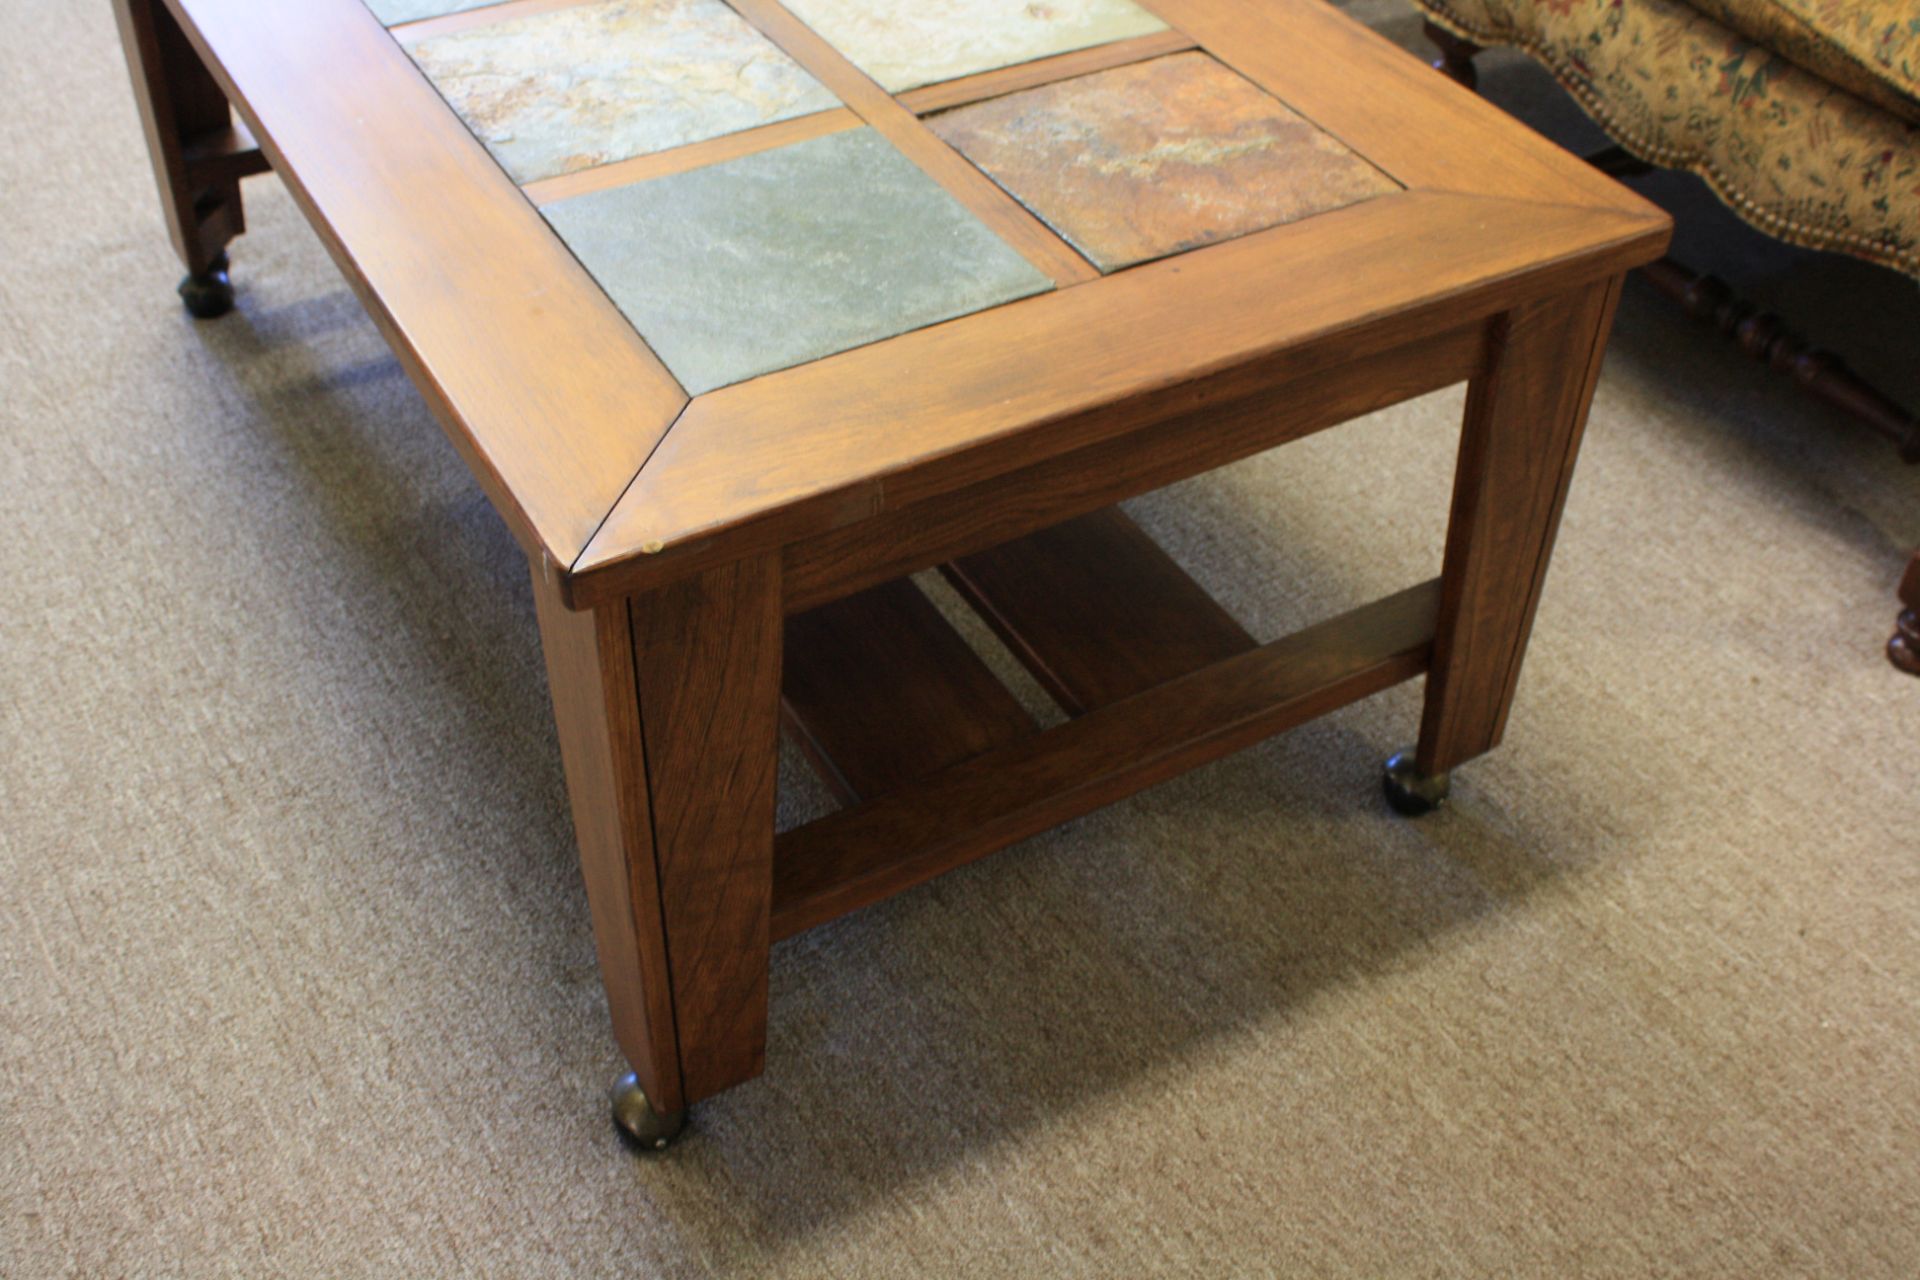 Coffee Table - 48"W x 28"D x 19"H, w/Stone Inlay - Image 3 of 3